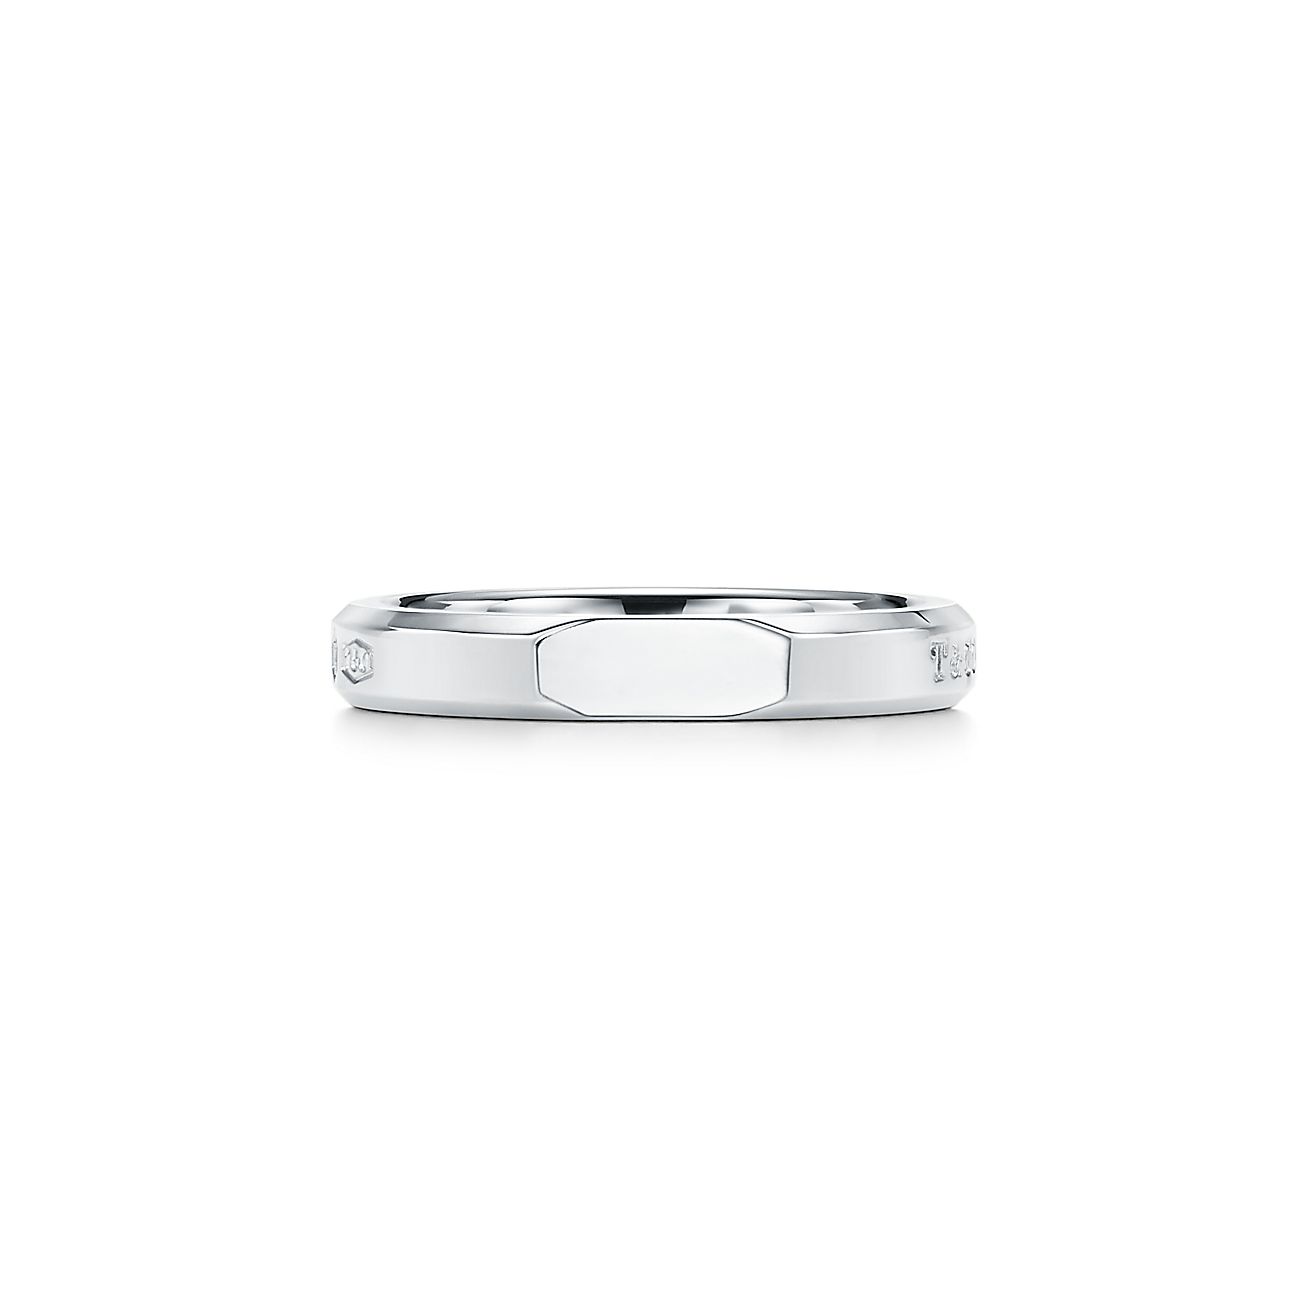 Tiffany 1837® Makers Narrow Slice Ring in Sterling Silver